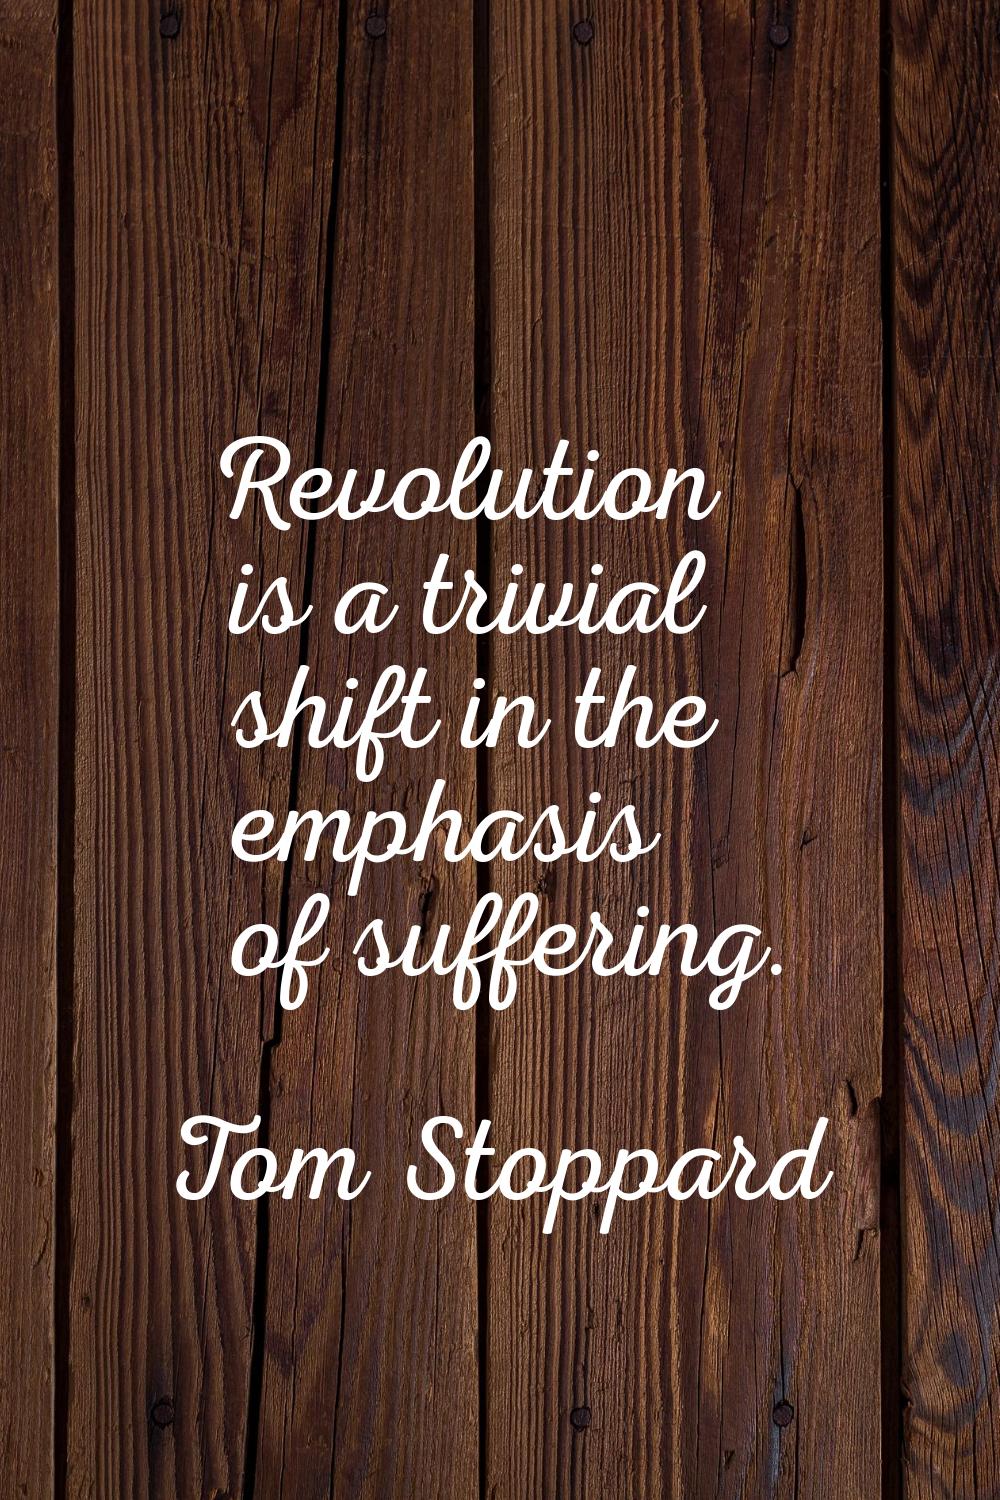 Revolution is a trivial shift in the emphasis of suffering.